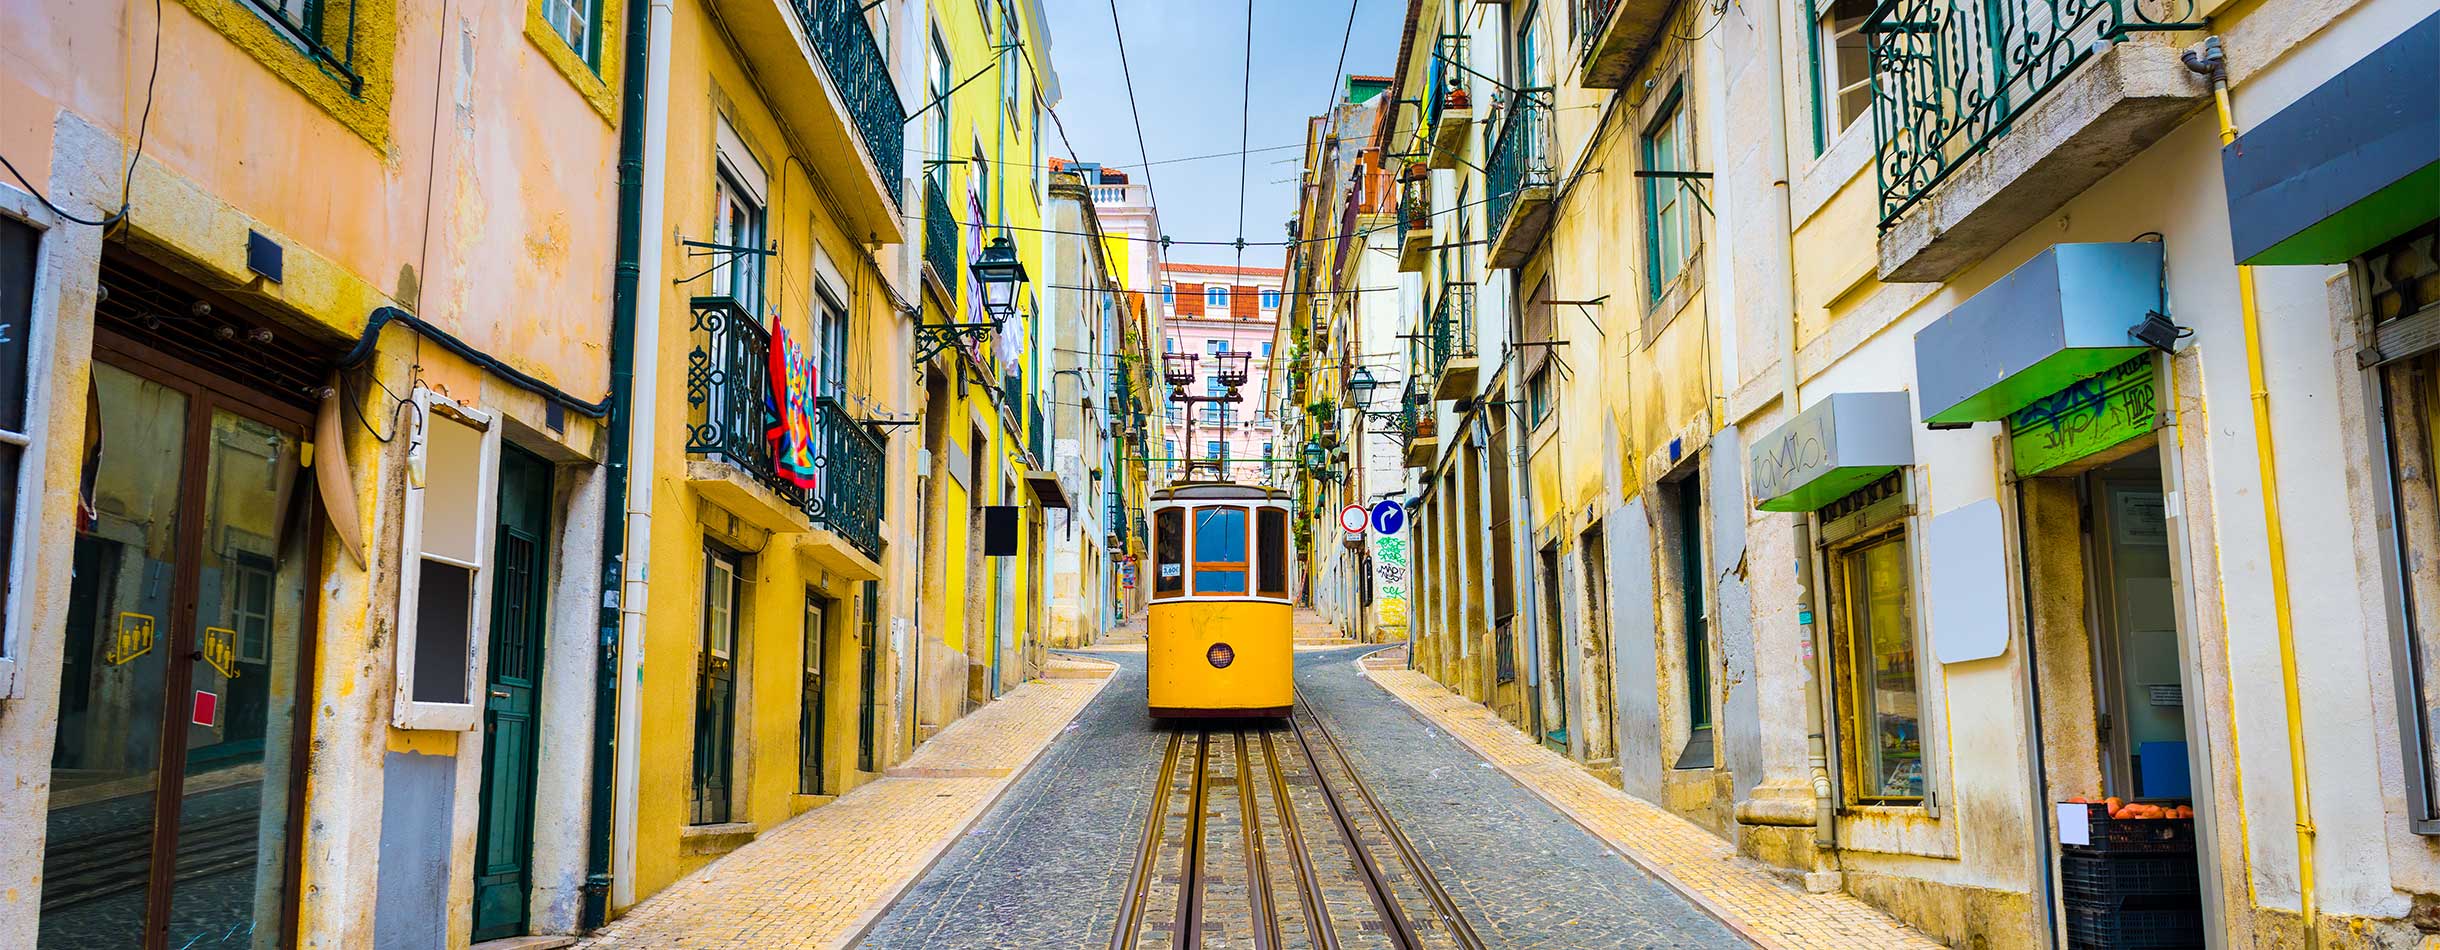 Lisbon, Portugal old town streets and tram